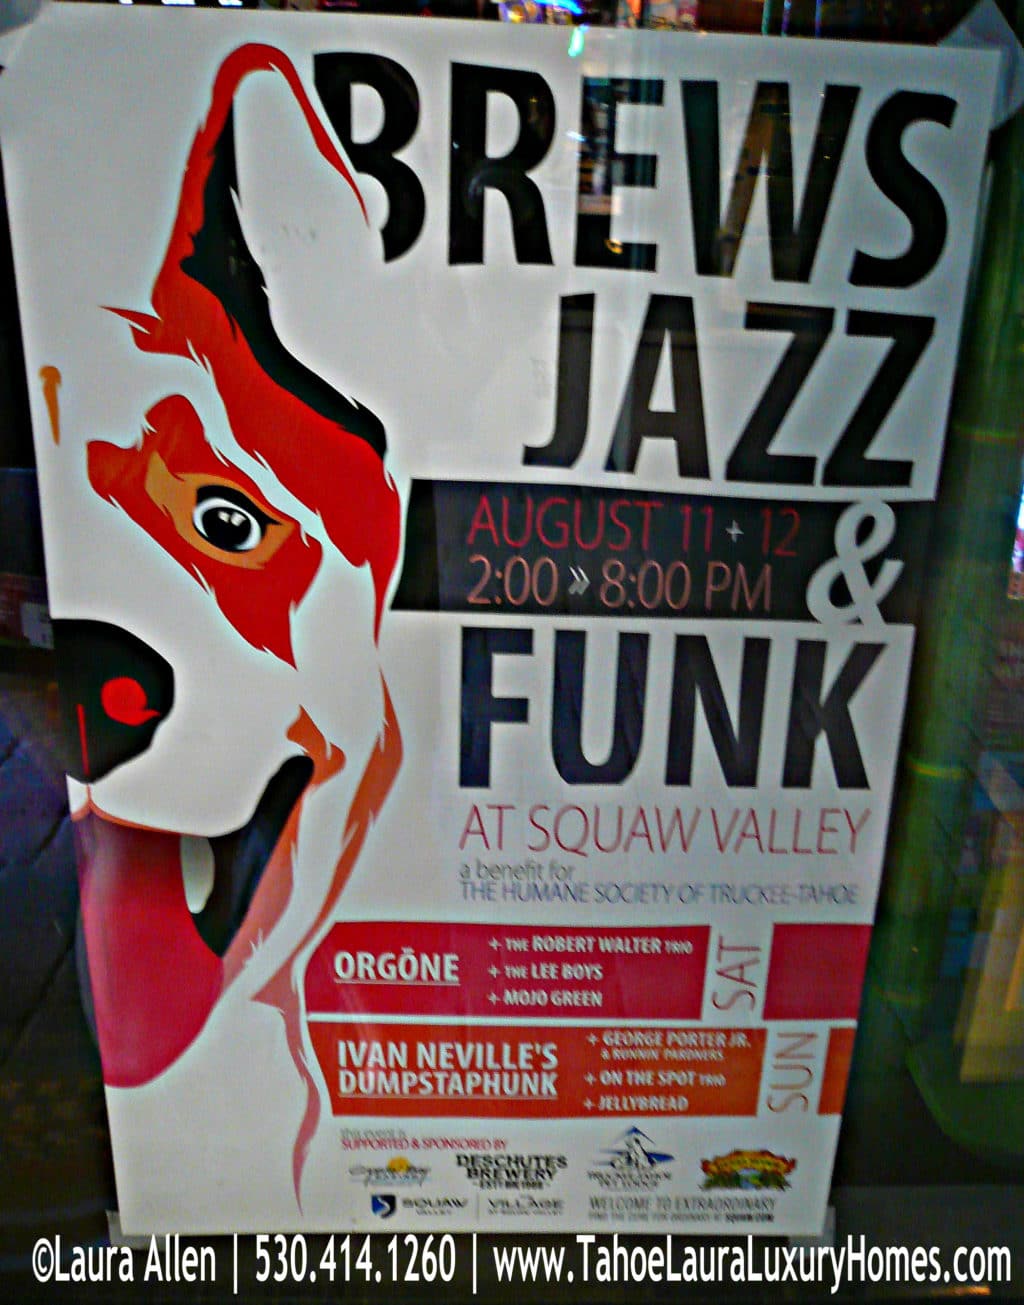 Brews, Jazz and Funk Fest in Squaw Valley 